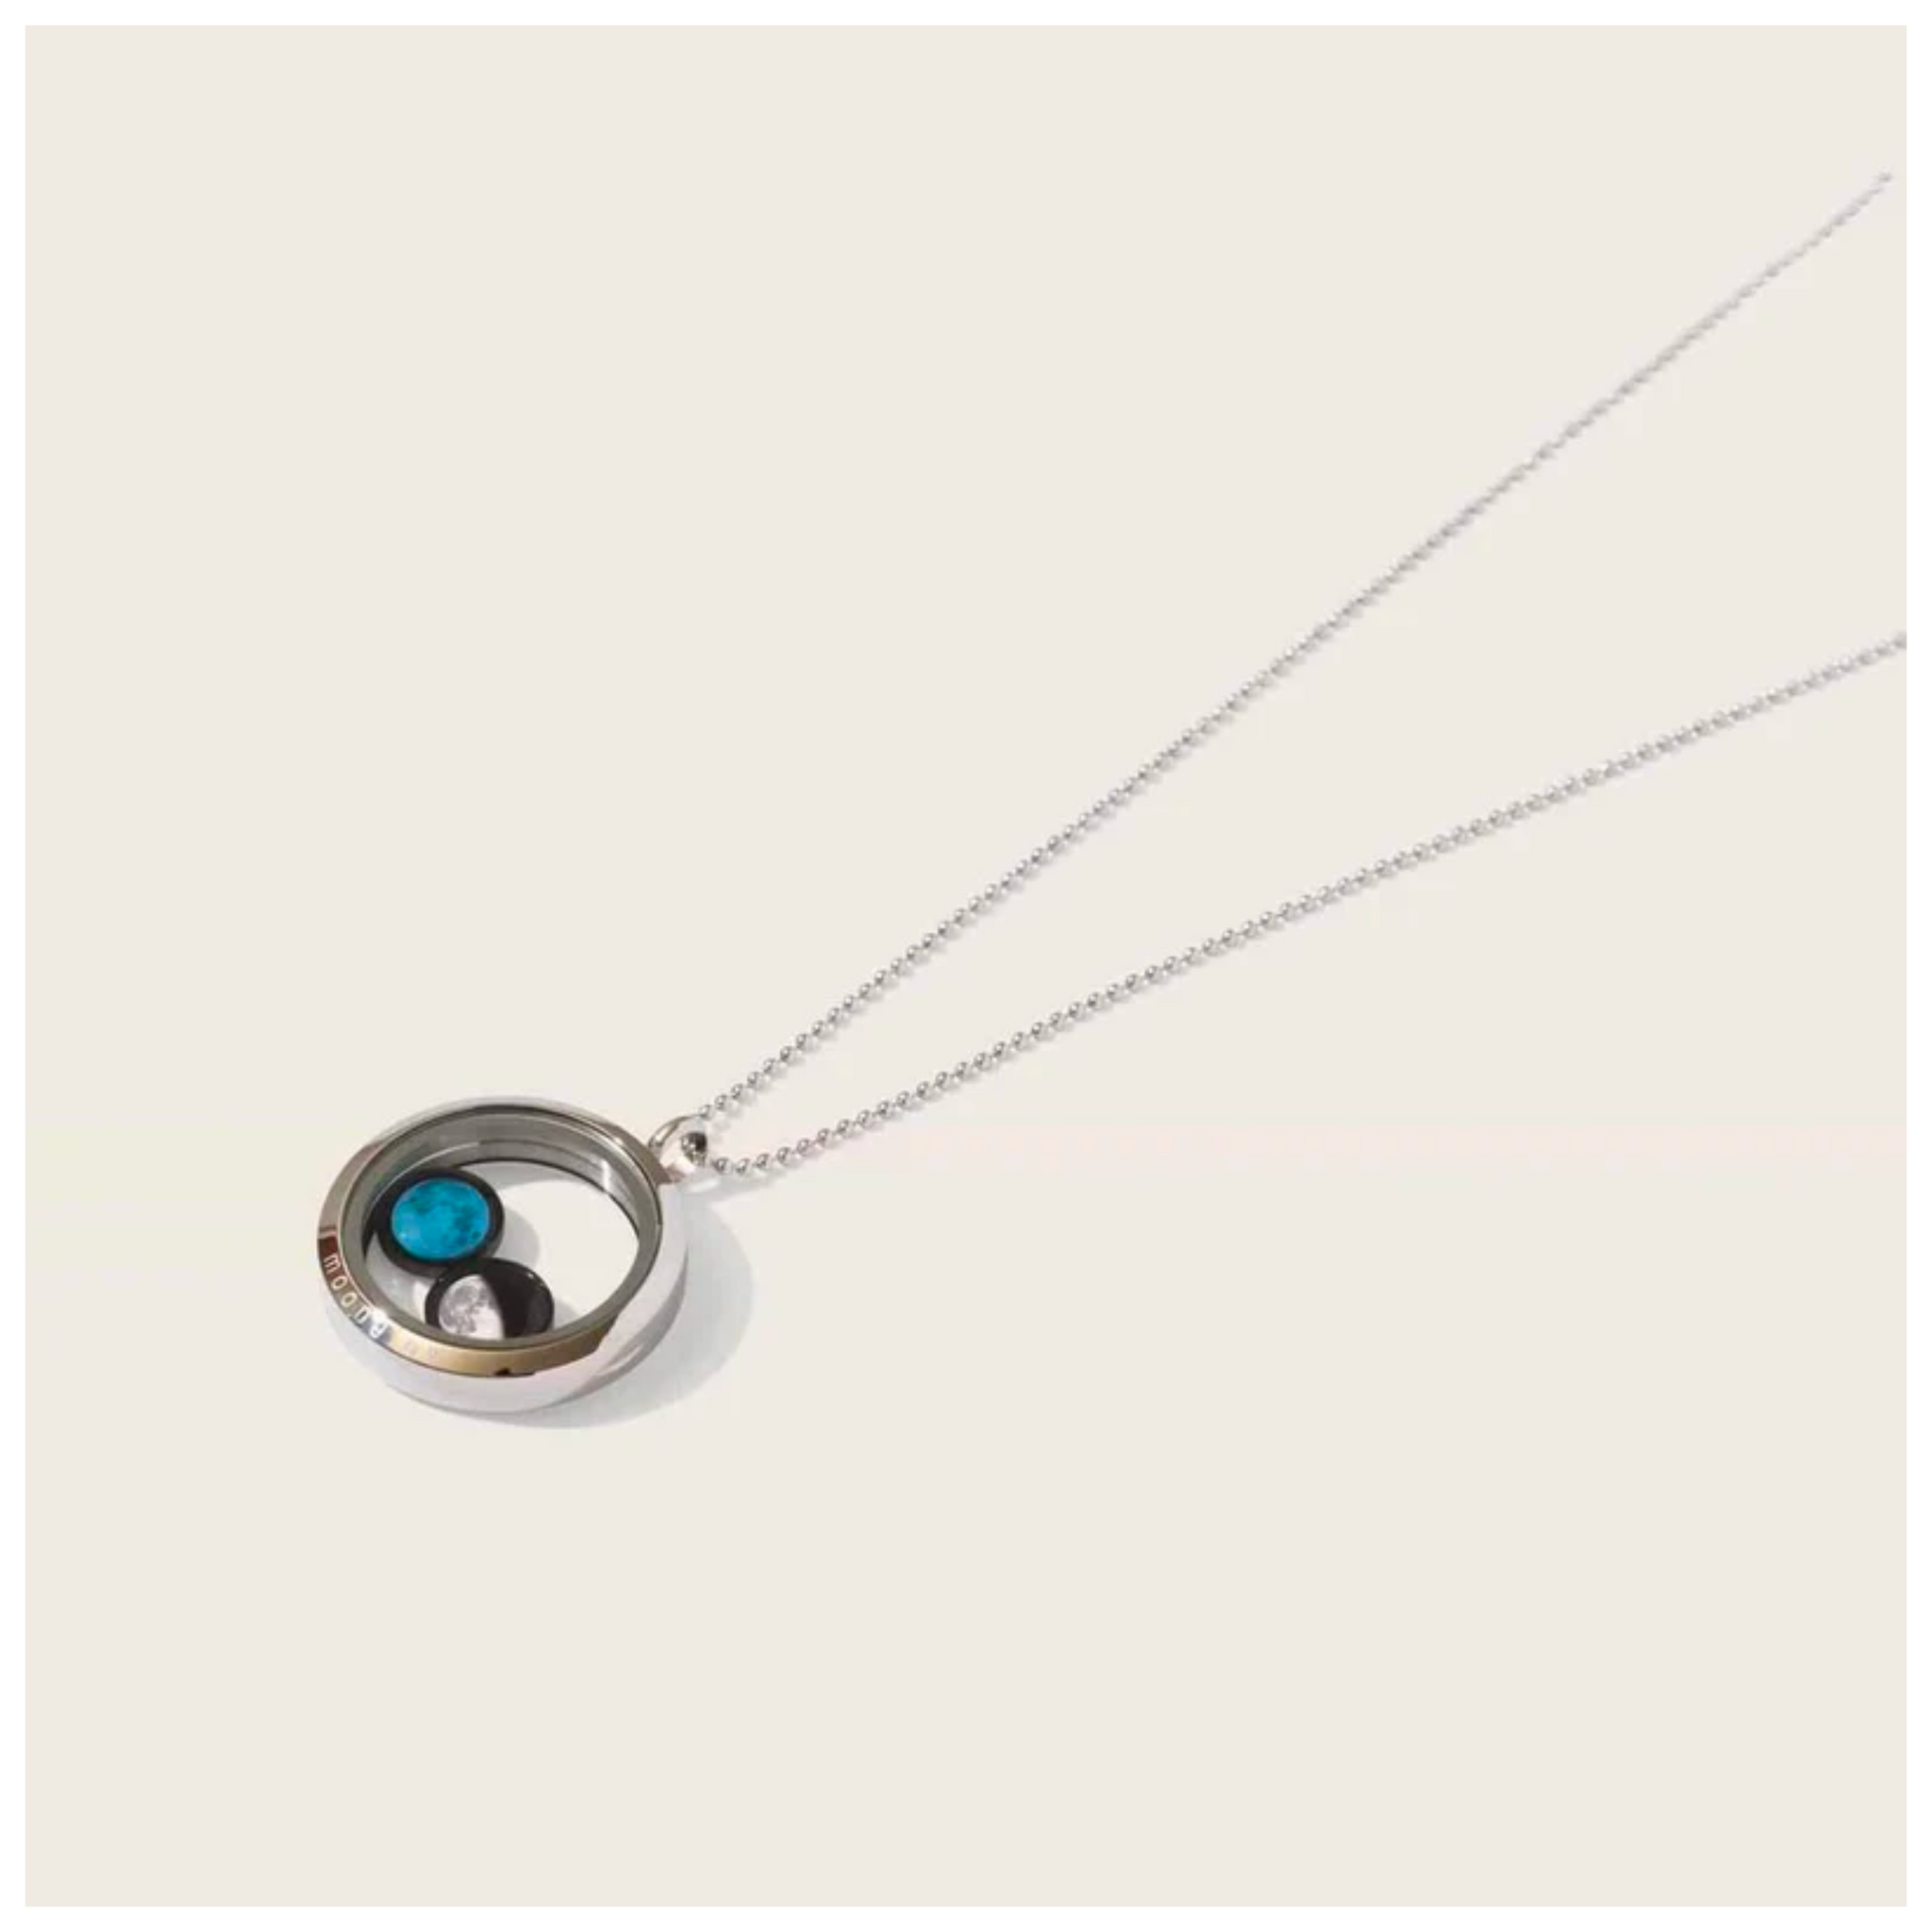 Lovers In The Locket Necklace in Stainless Steel